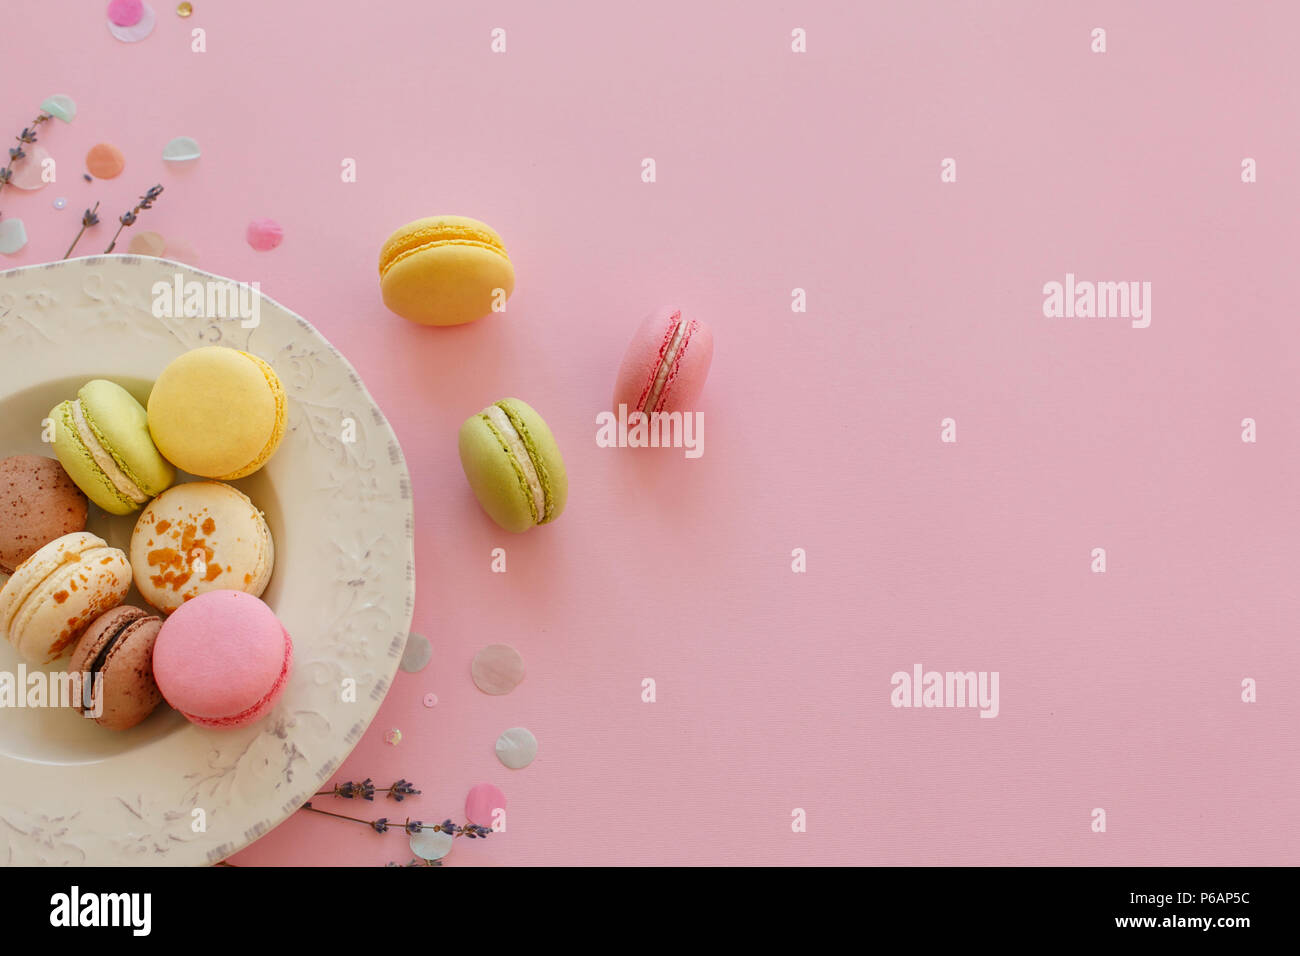 food photography flat lay of tasty colorful macarons in vintage plate on trendy pastel pink paper with lavender and confetti. space for text pink, yel Stock Photo